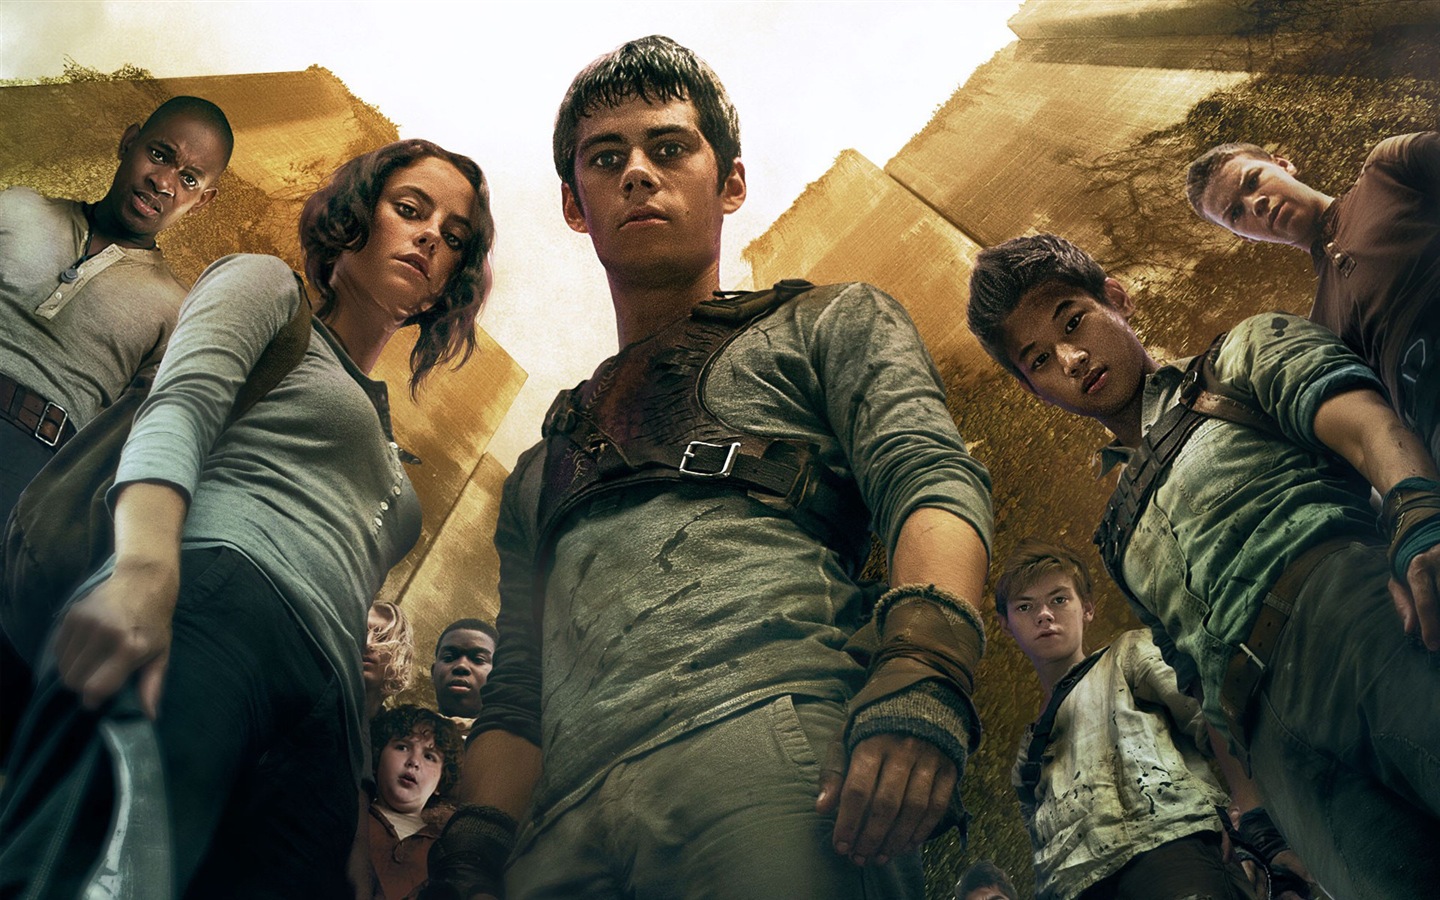 The Maze Runner HD movie wallpapers #3 - 1440x900